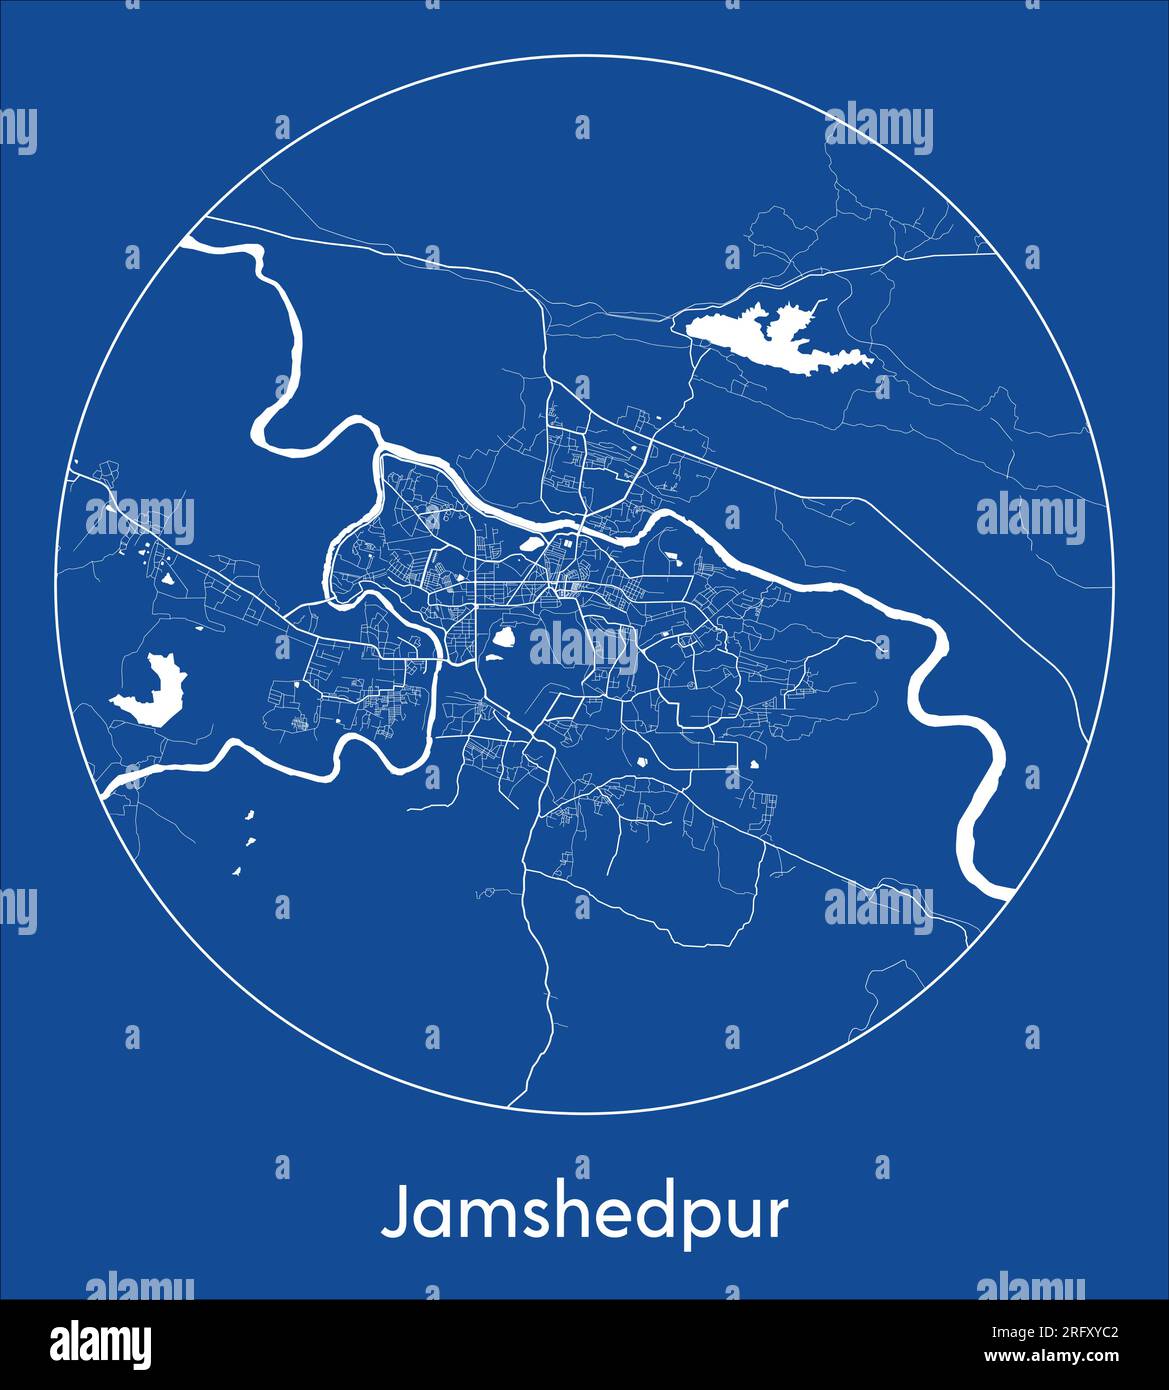 City Map Jamshedpur India Asia blue print round Circle vector illustration Stock Vector